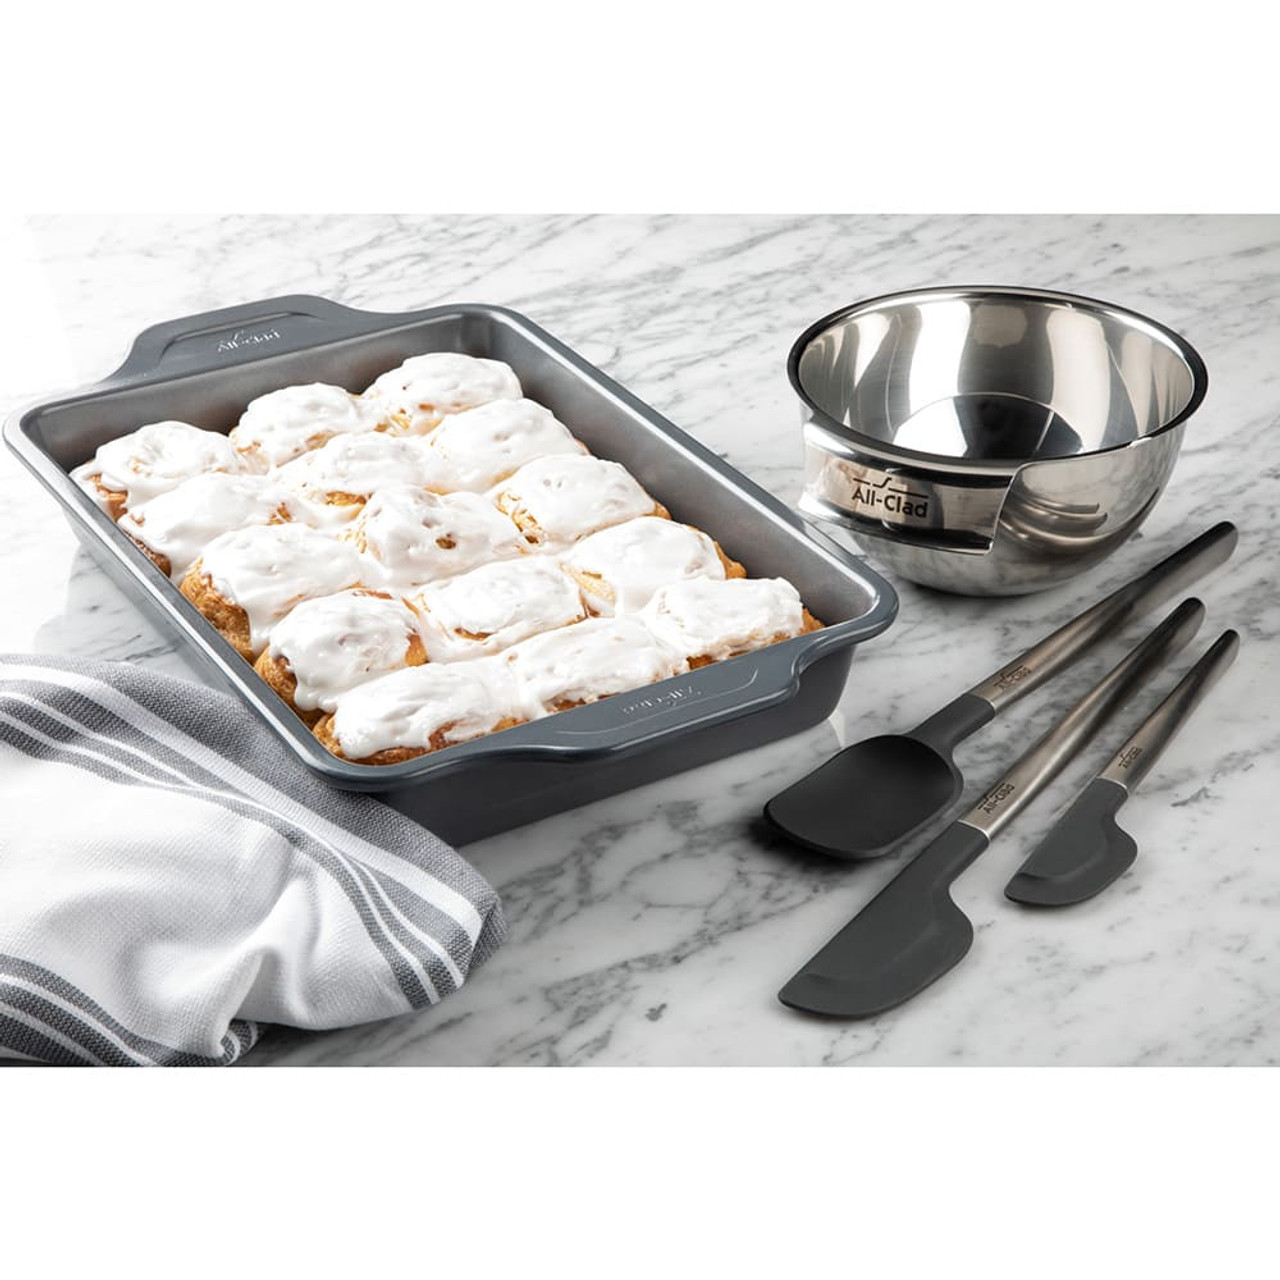 All-Clad Pro-Release Nonstick Bakeware, Round Cake Pan, 9 inch